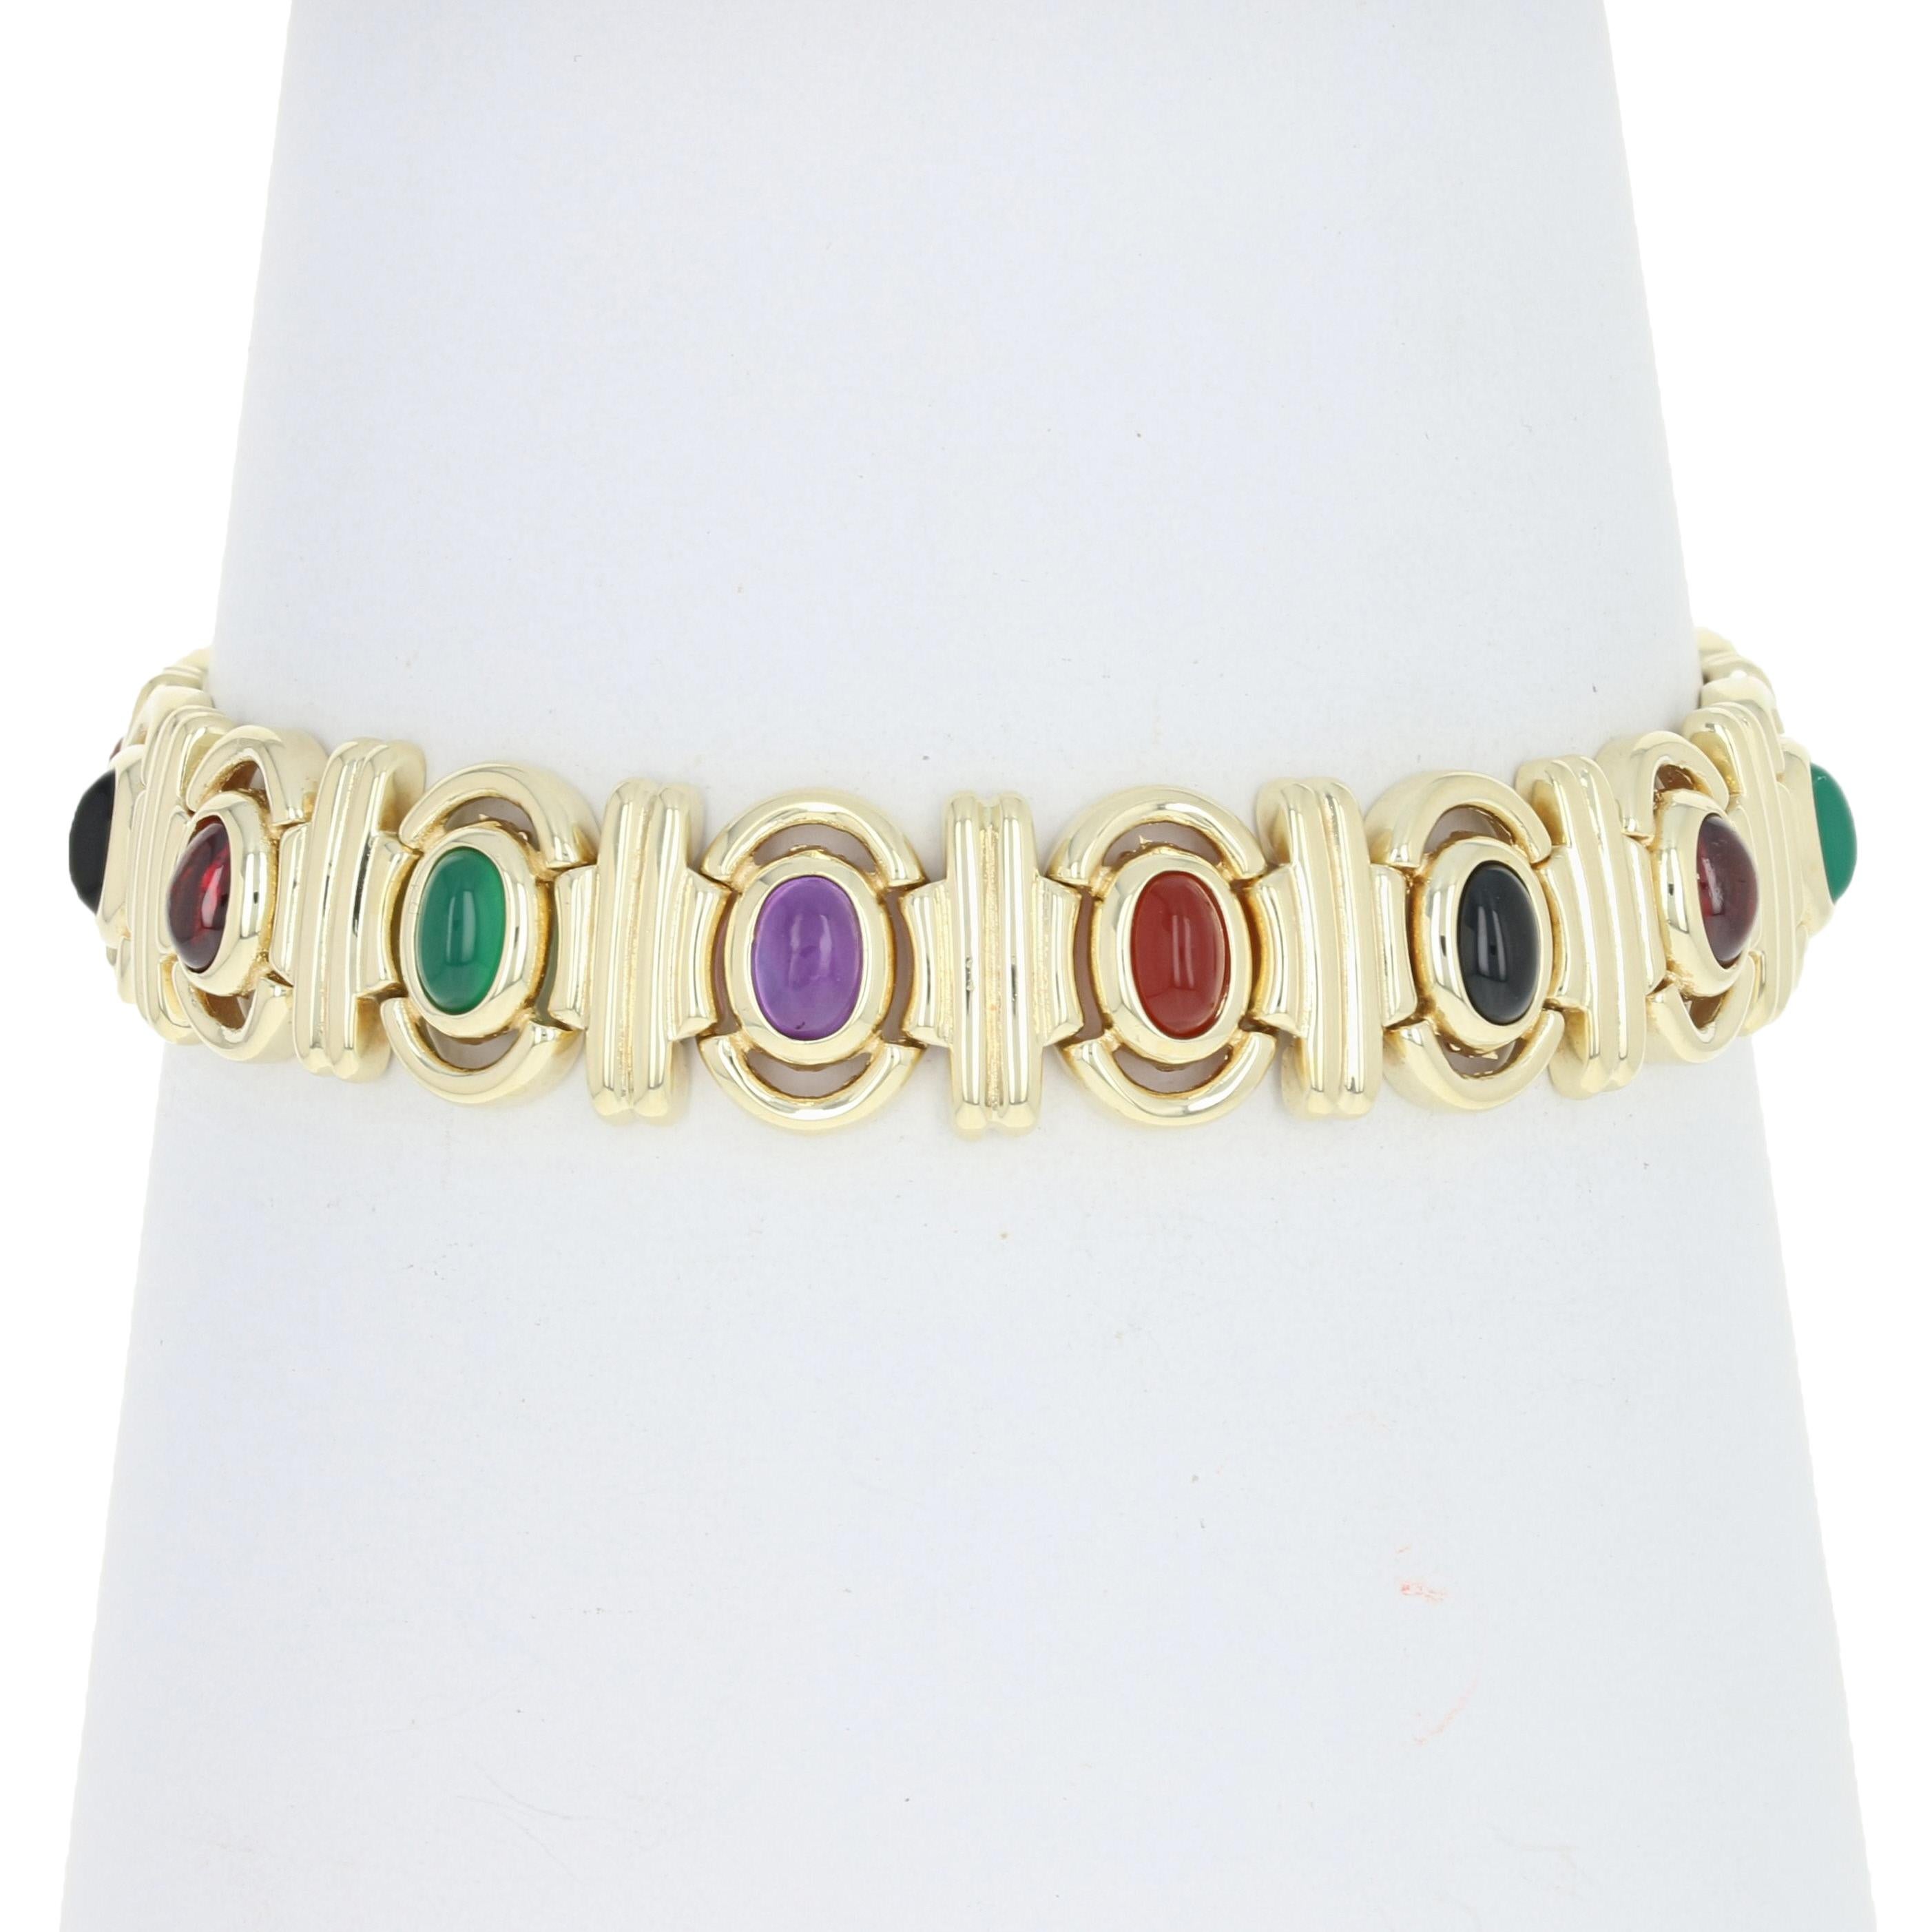 Hosting a kaleidoscope of majestic gemstones, this elegant bracelet will be a versatile accessory in your collection to complement any season’s wardrobe! This link-style piece showcases luminous amethyst, green chalcedony, carnelian, onyx, and pink